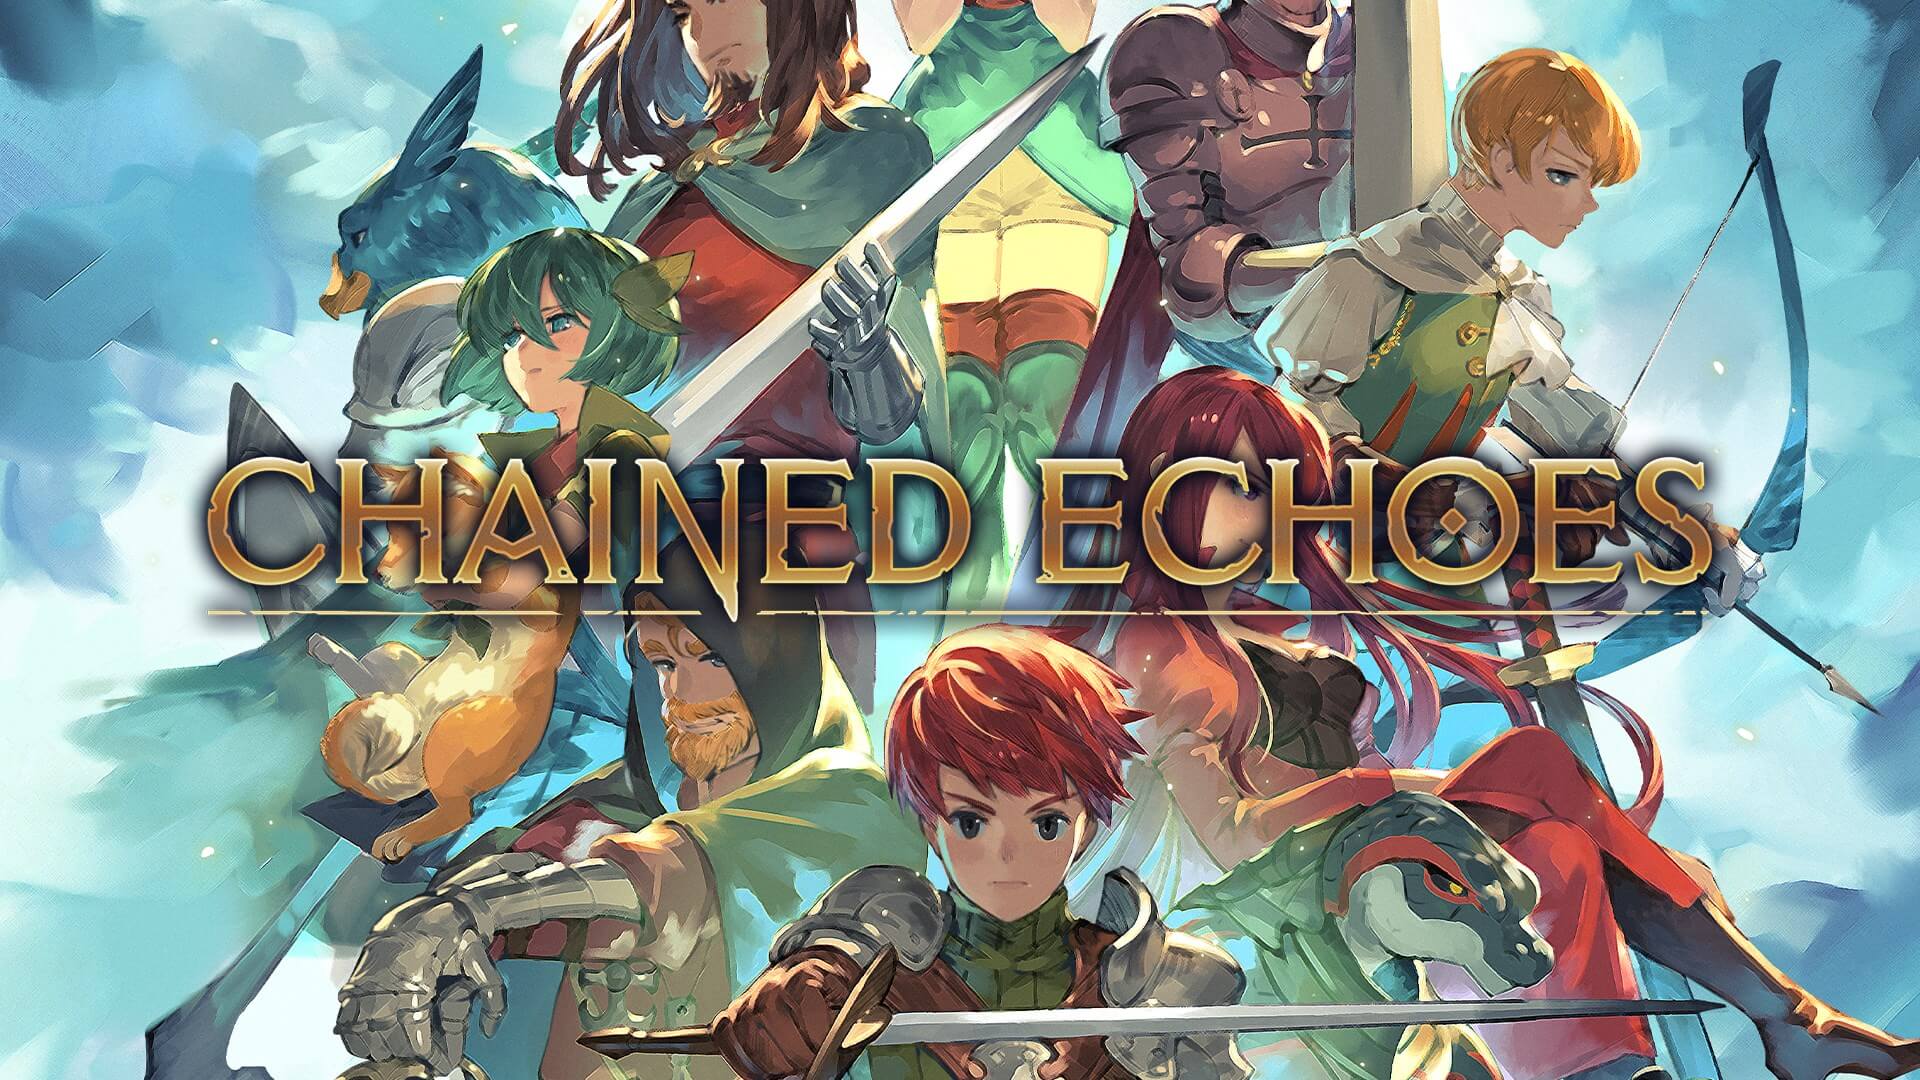 Unlock Characters Guide - Chained Echoes